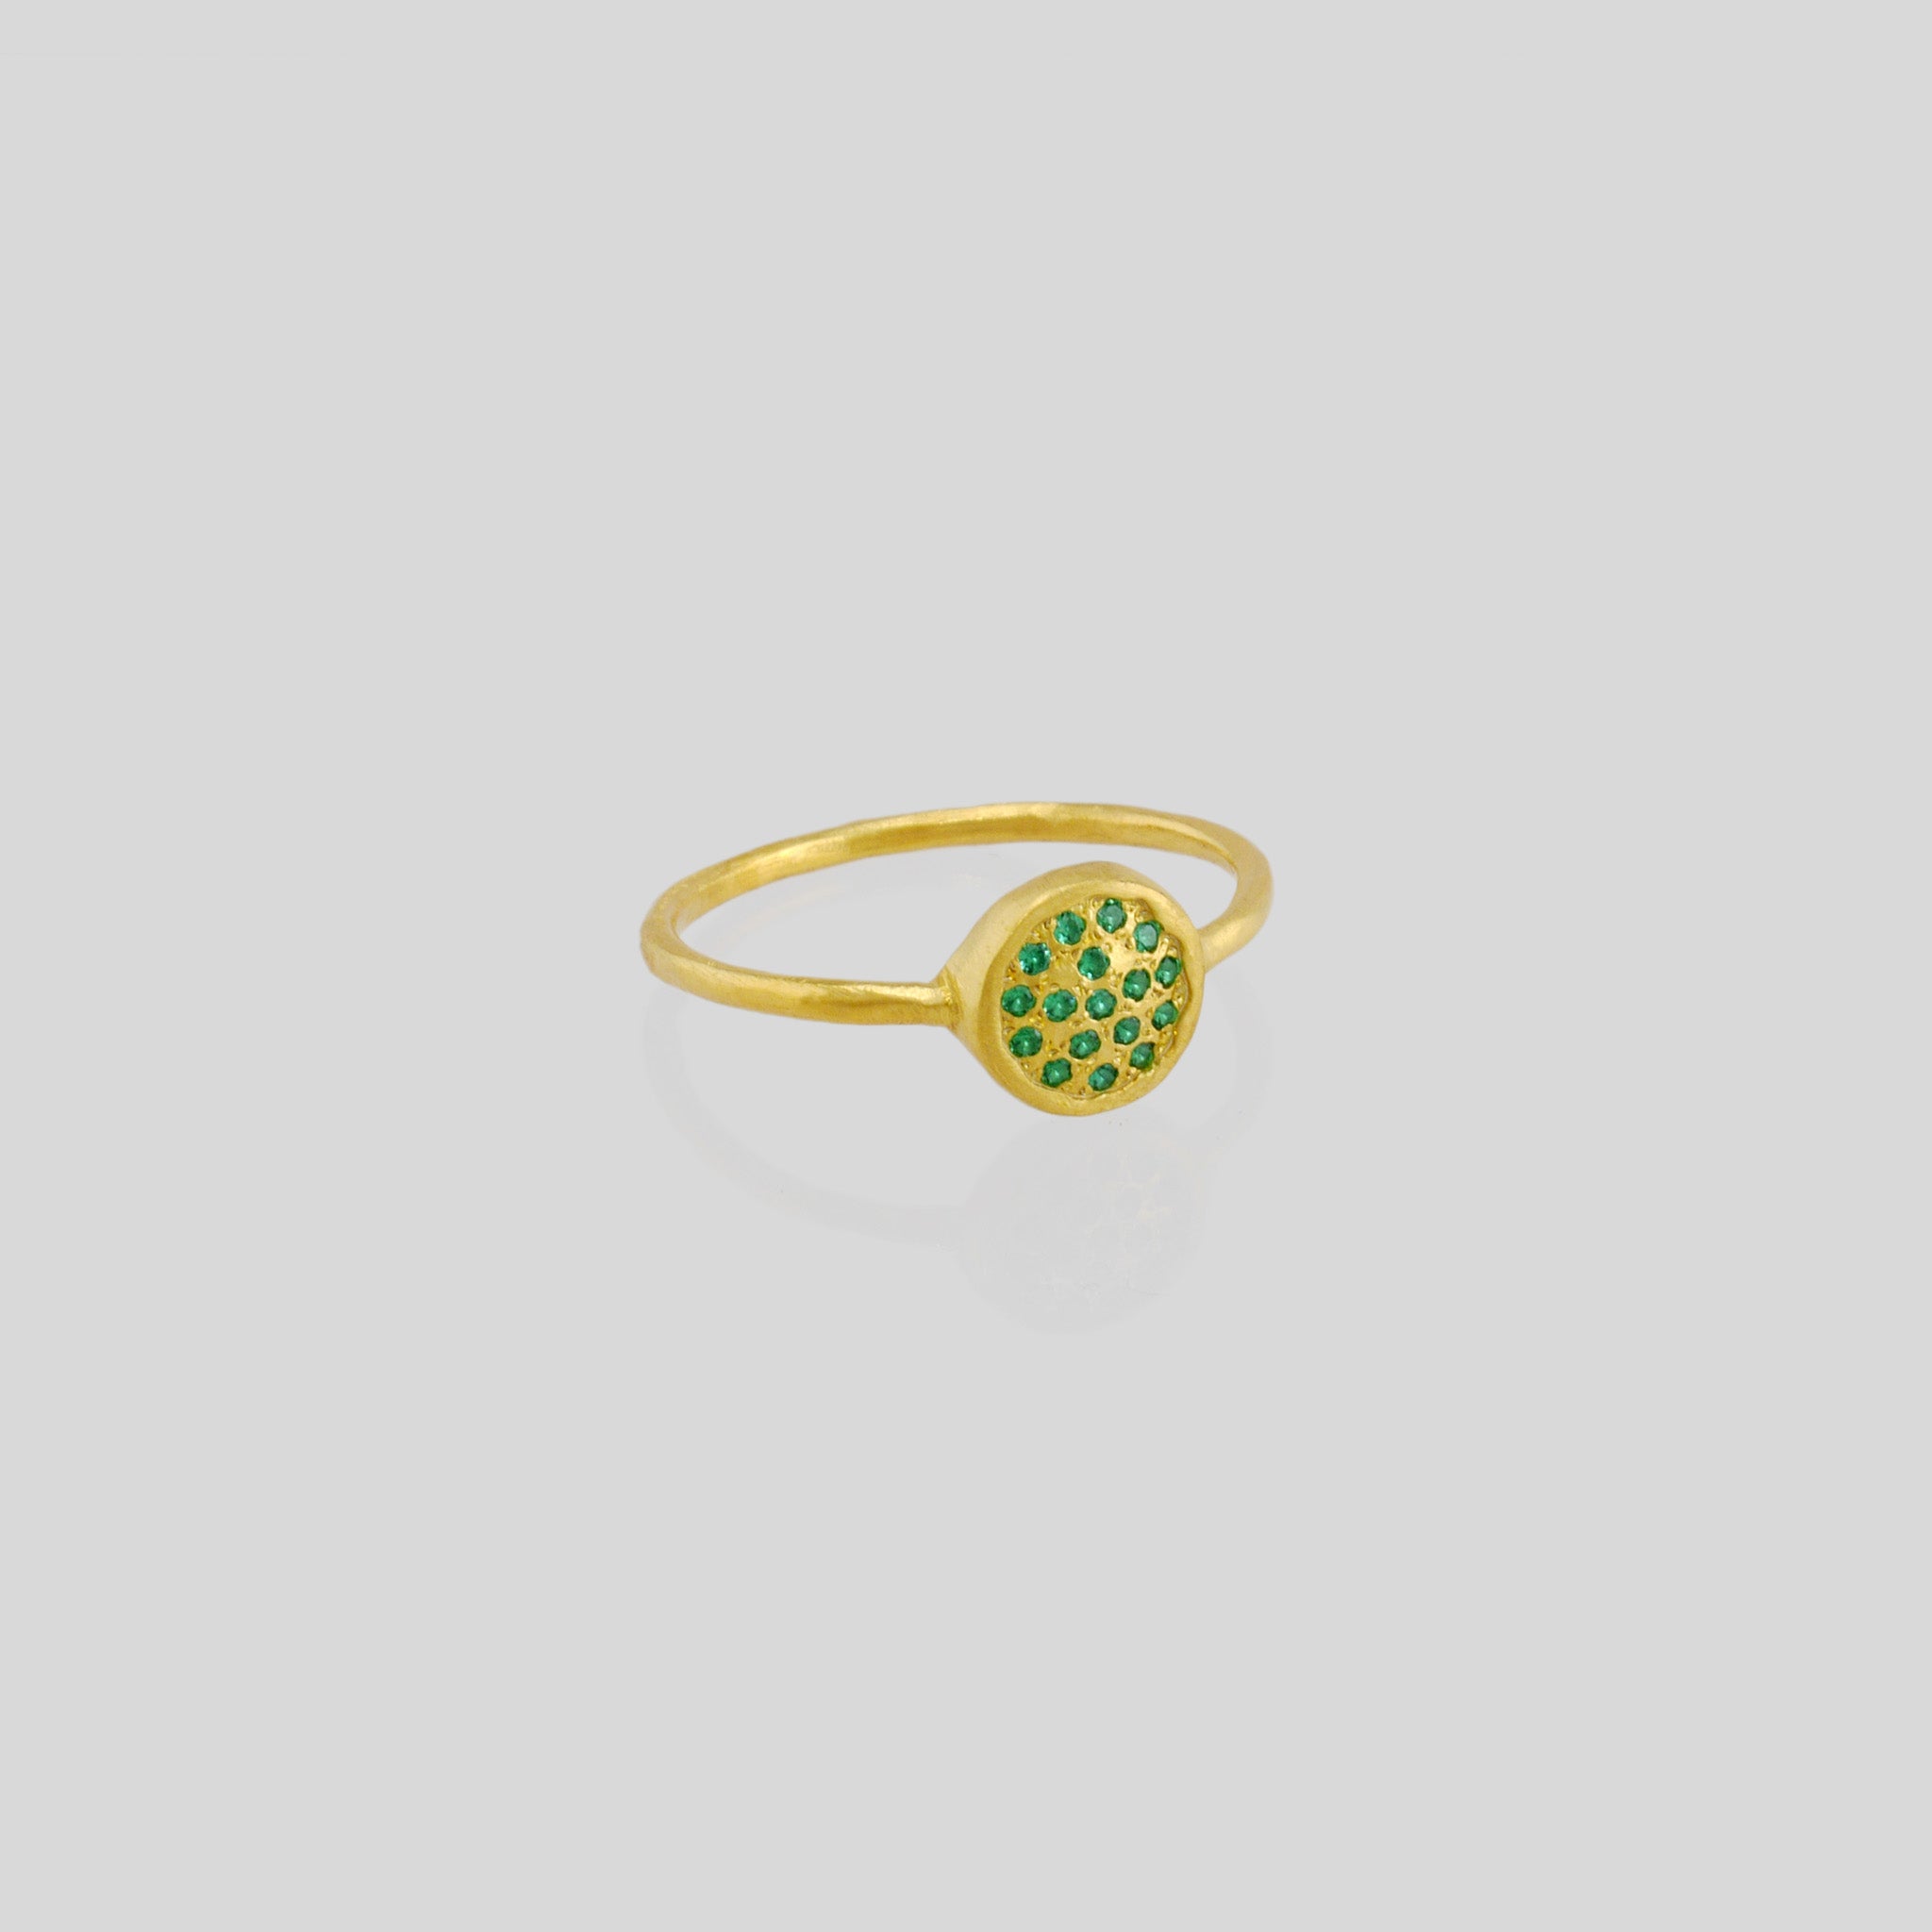 Delicate hand-made gold ring with a circular plate set with tiny Emerald gemstones. The sparkle from the stones resembles a starry night. 